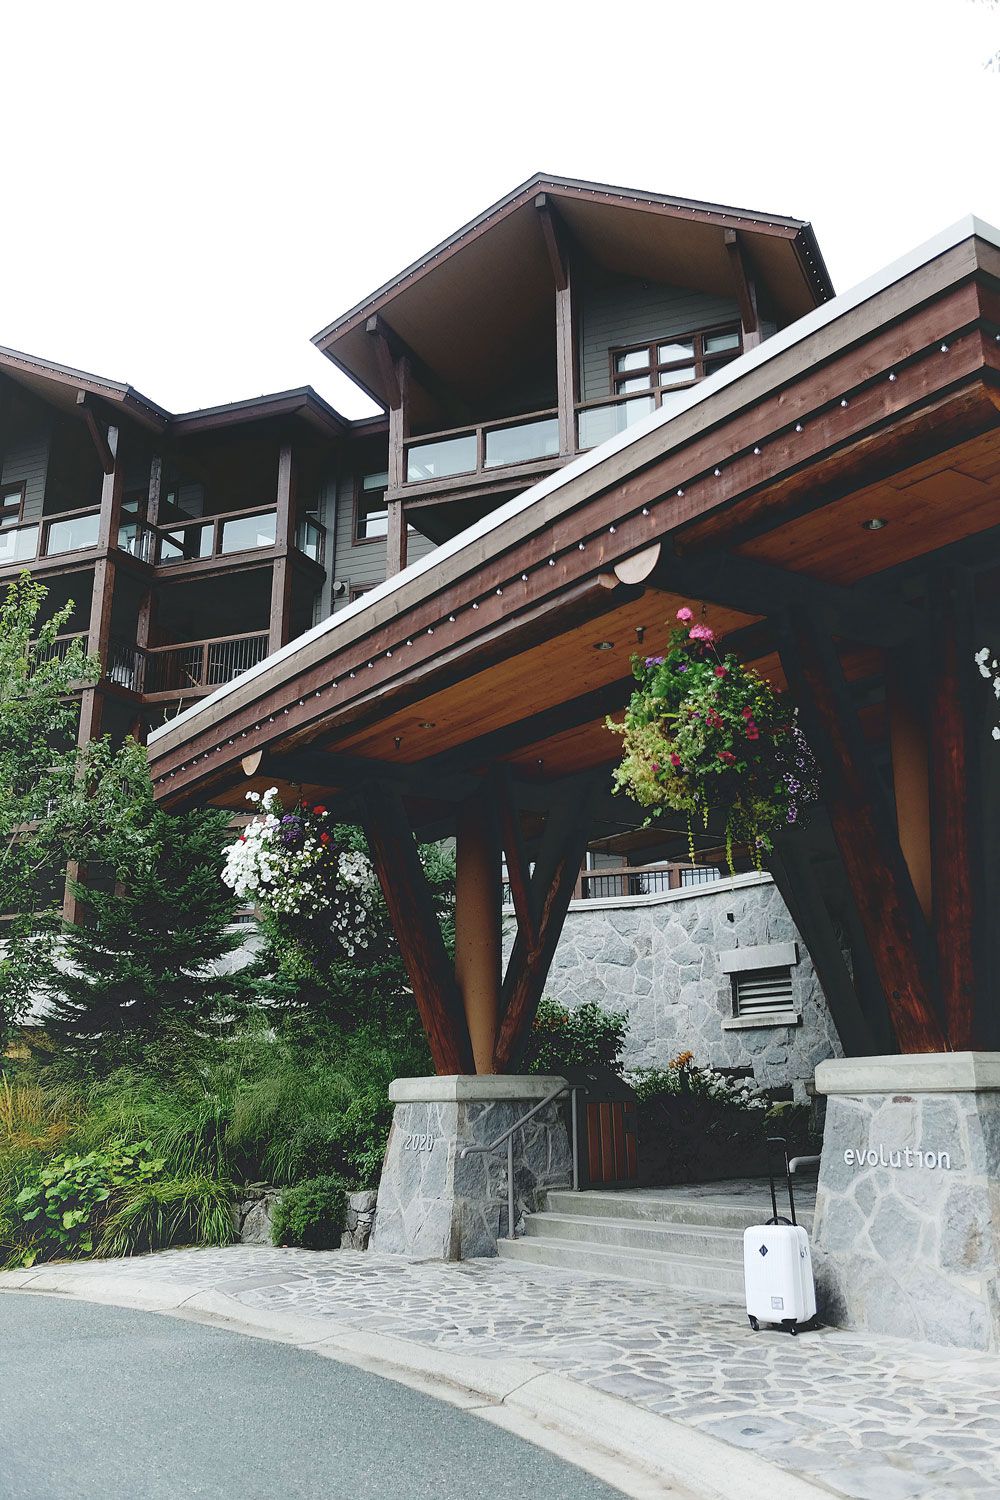 Where to stay in Whistler: Evolution Hotel in Creekside, Whistler